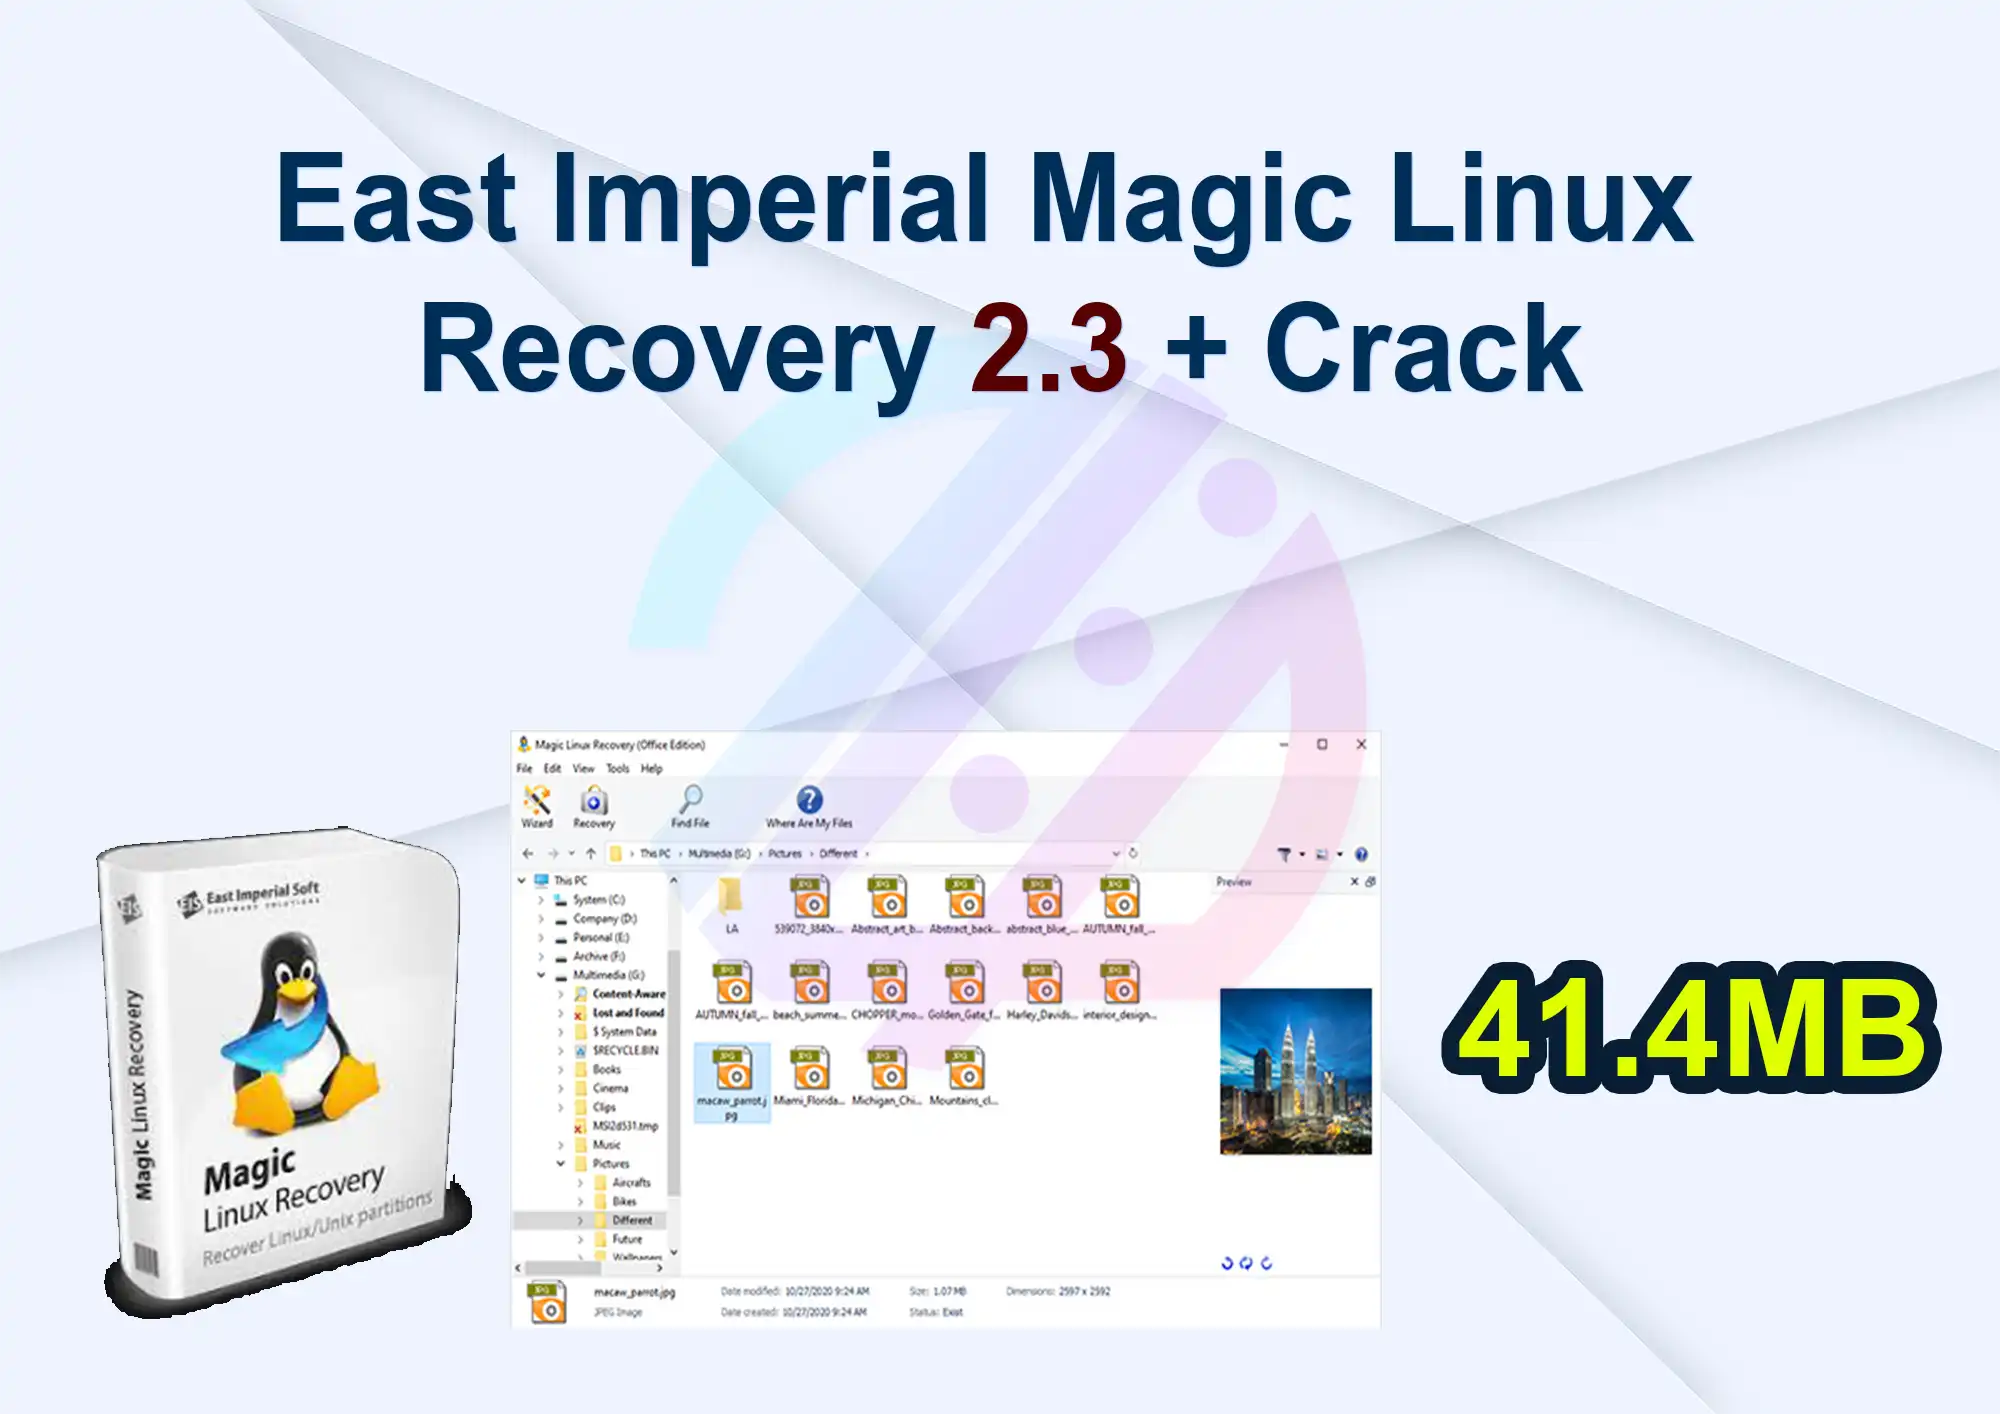 East Imperial Magic Linux Recovery 2.3 + Crack